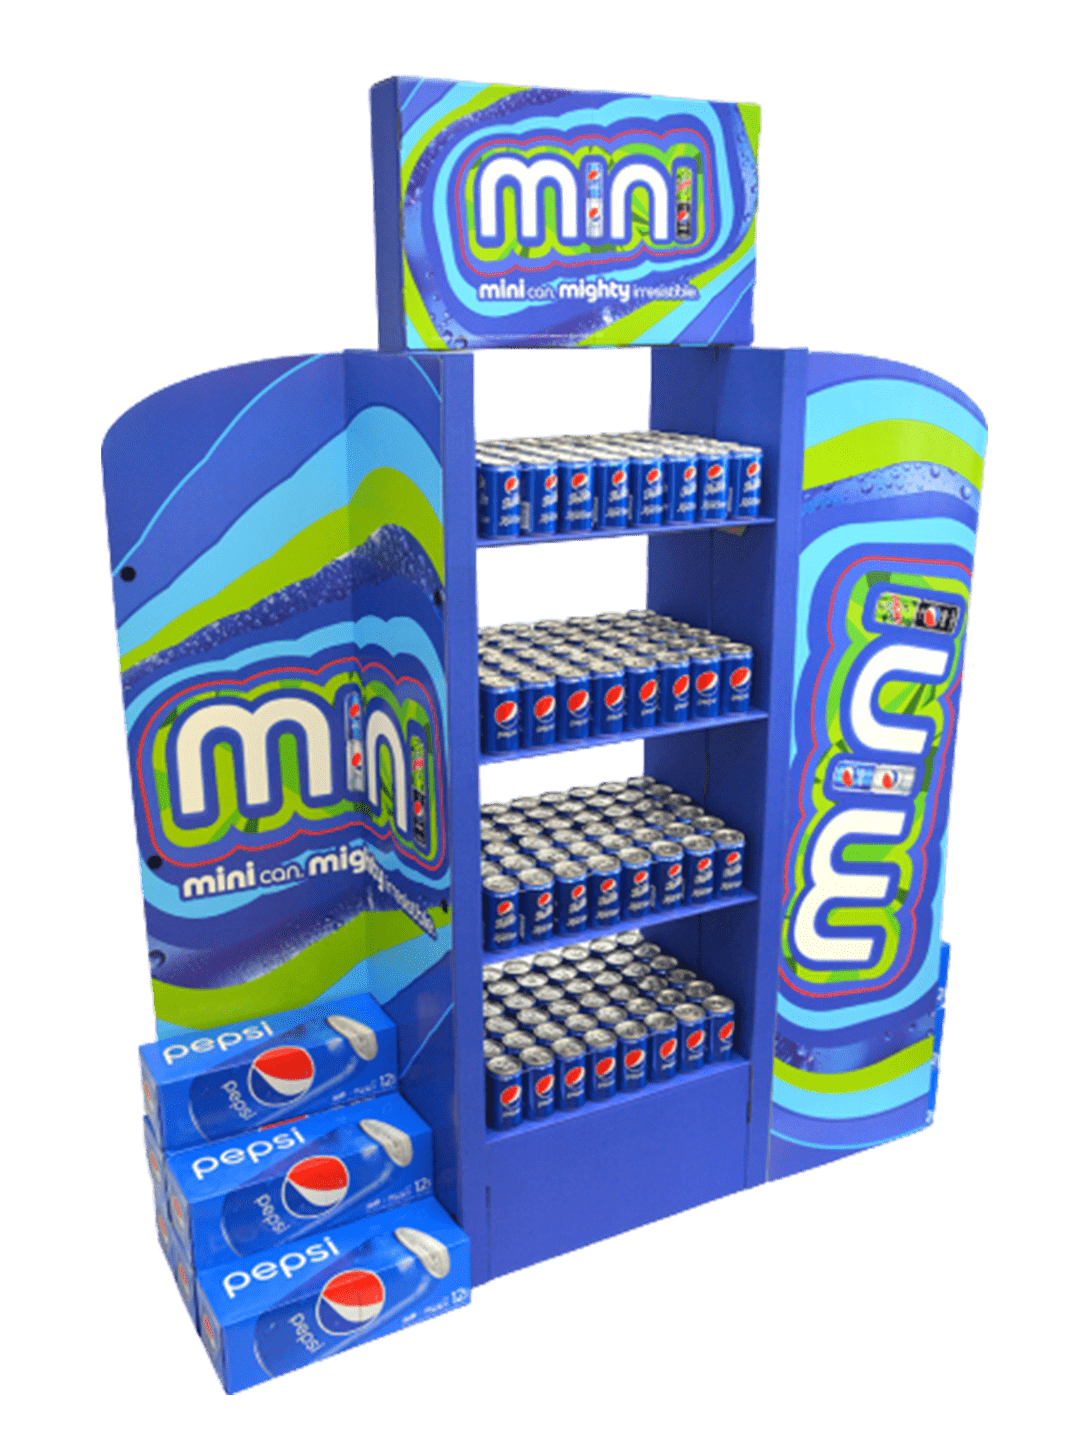 Beverage display featuring mini Pepsi cans